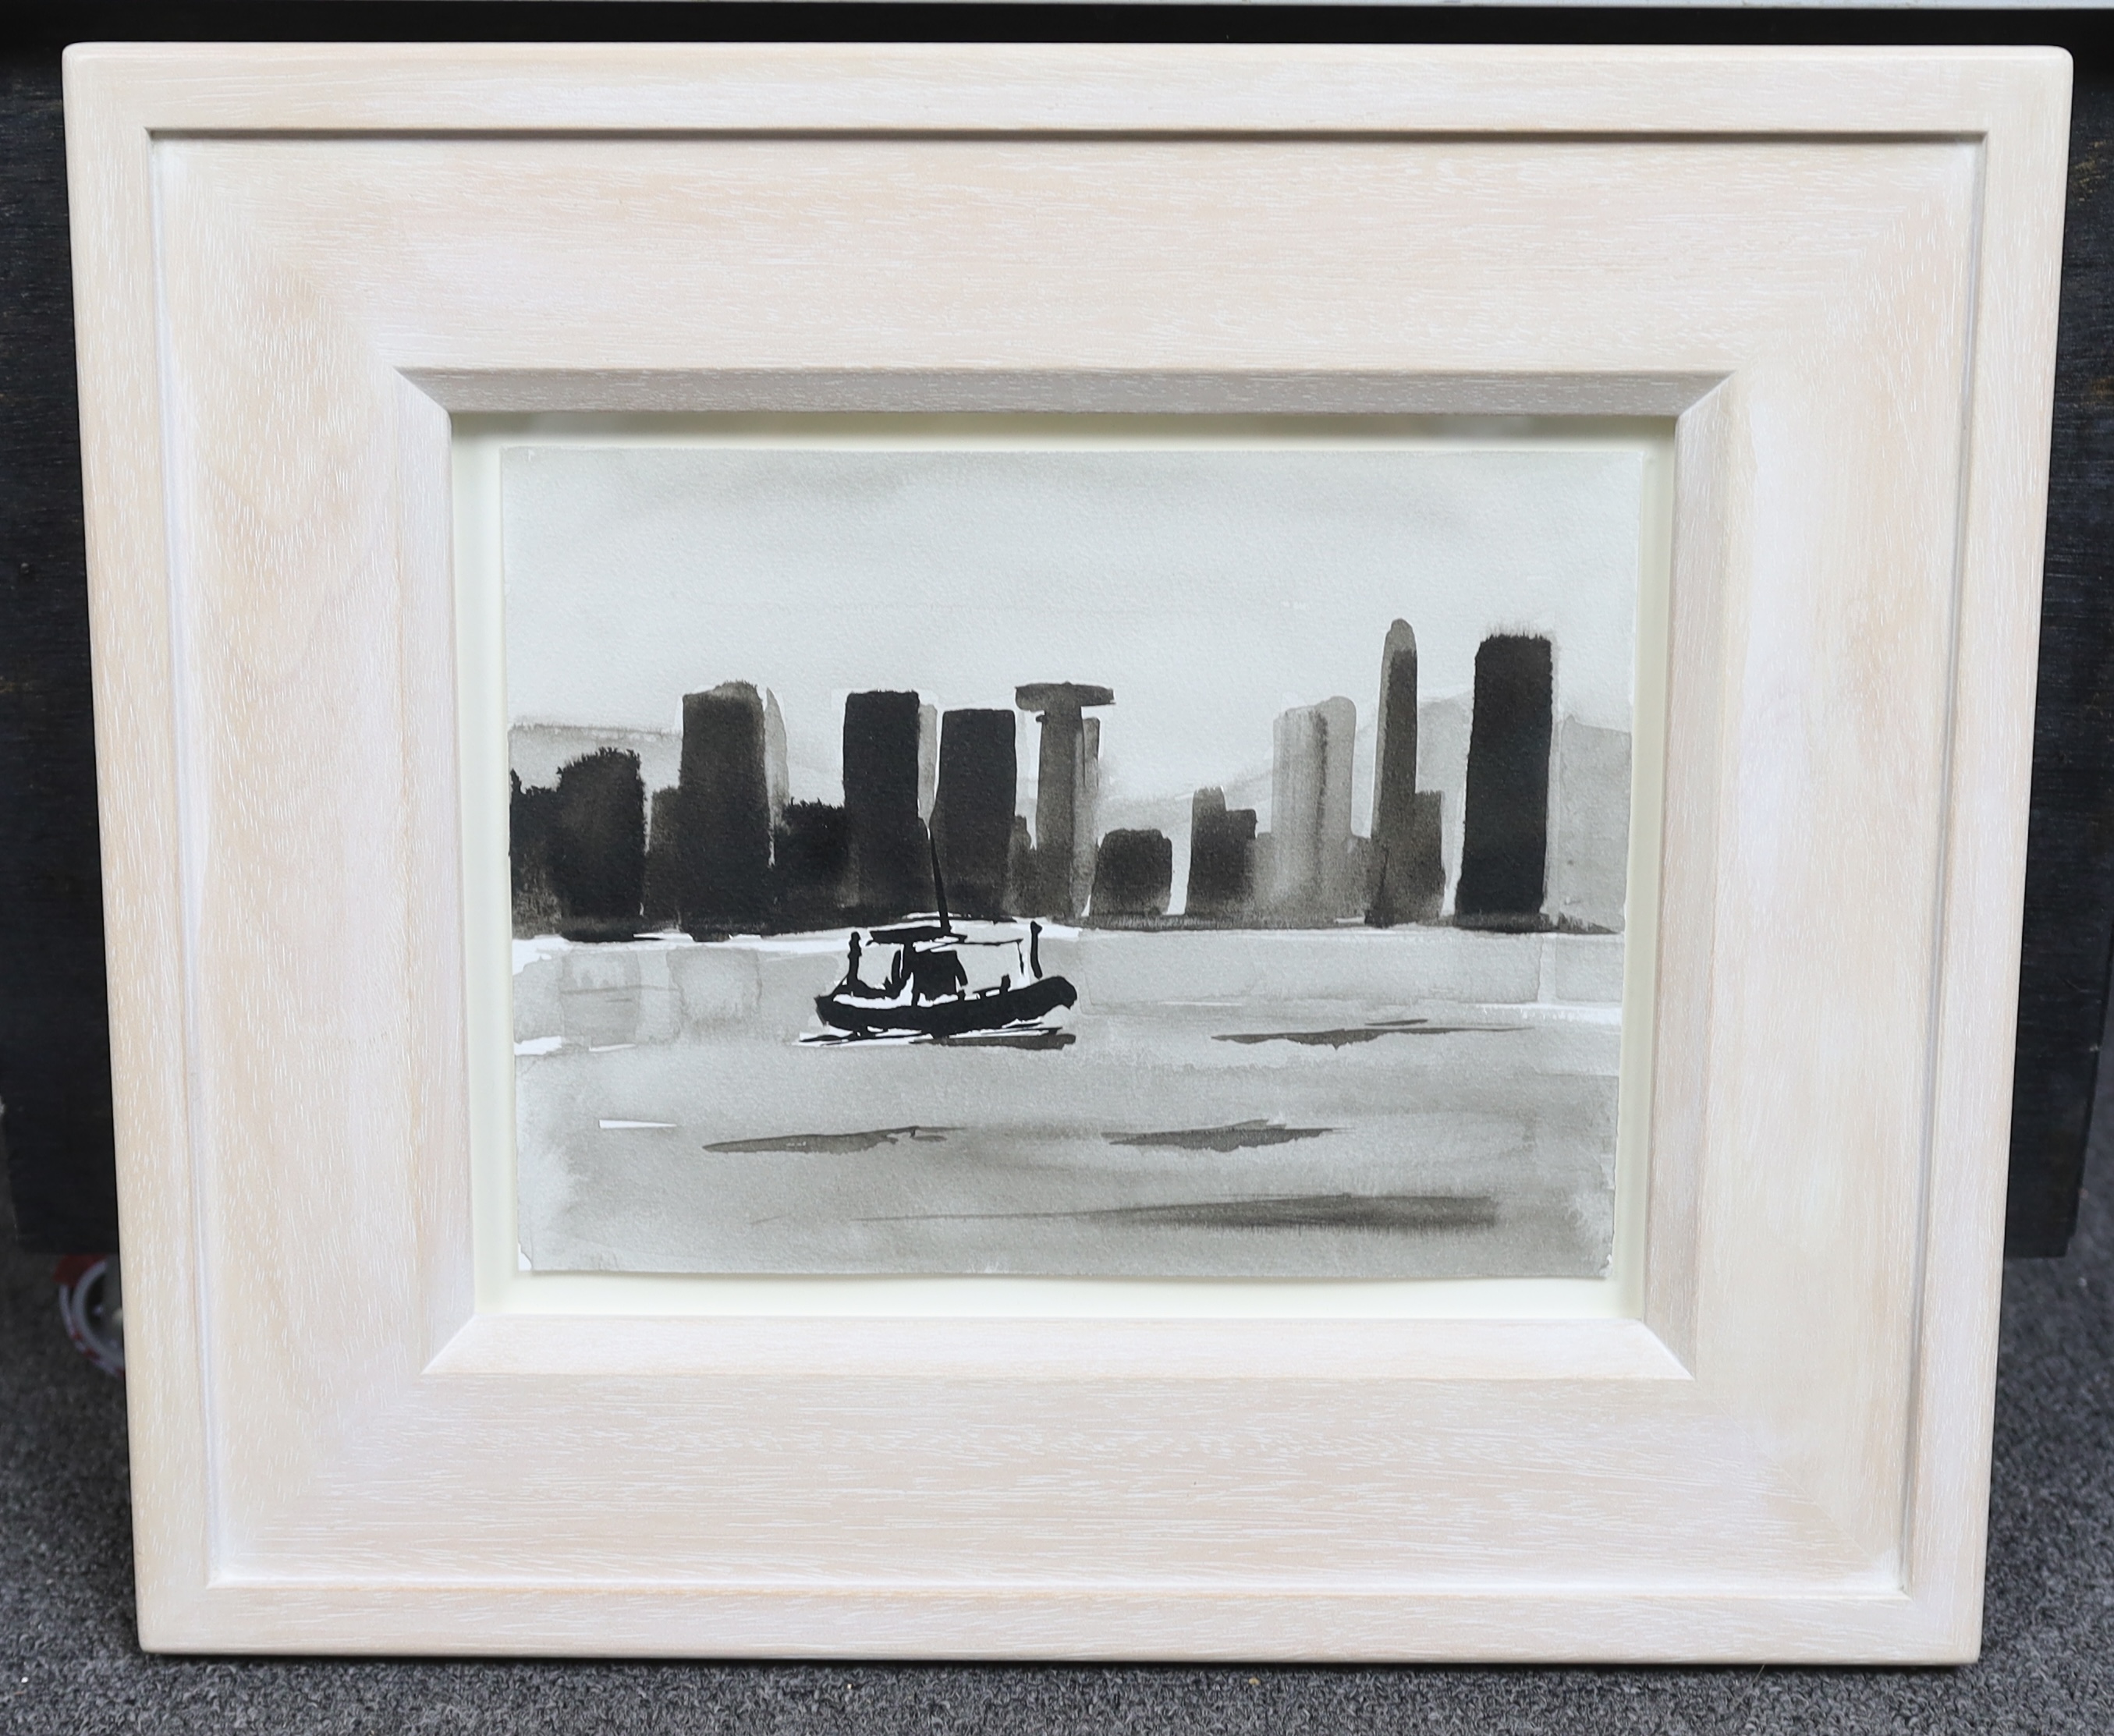 Liam Spencer (British, b.1964), 'Boat and skyscrapers, Hong Kong', ink drawing, 18 x 24.5cm